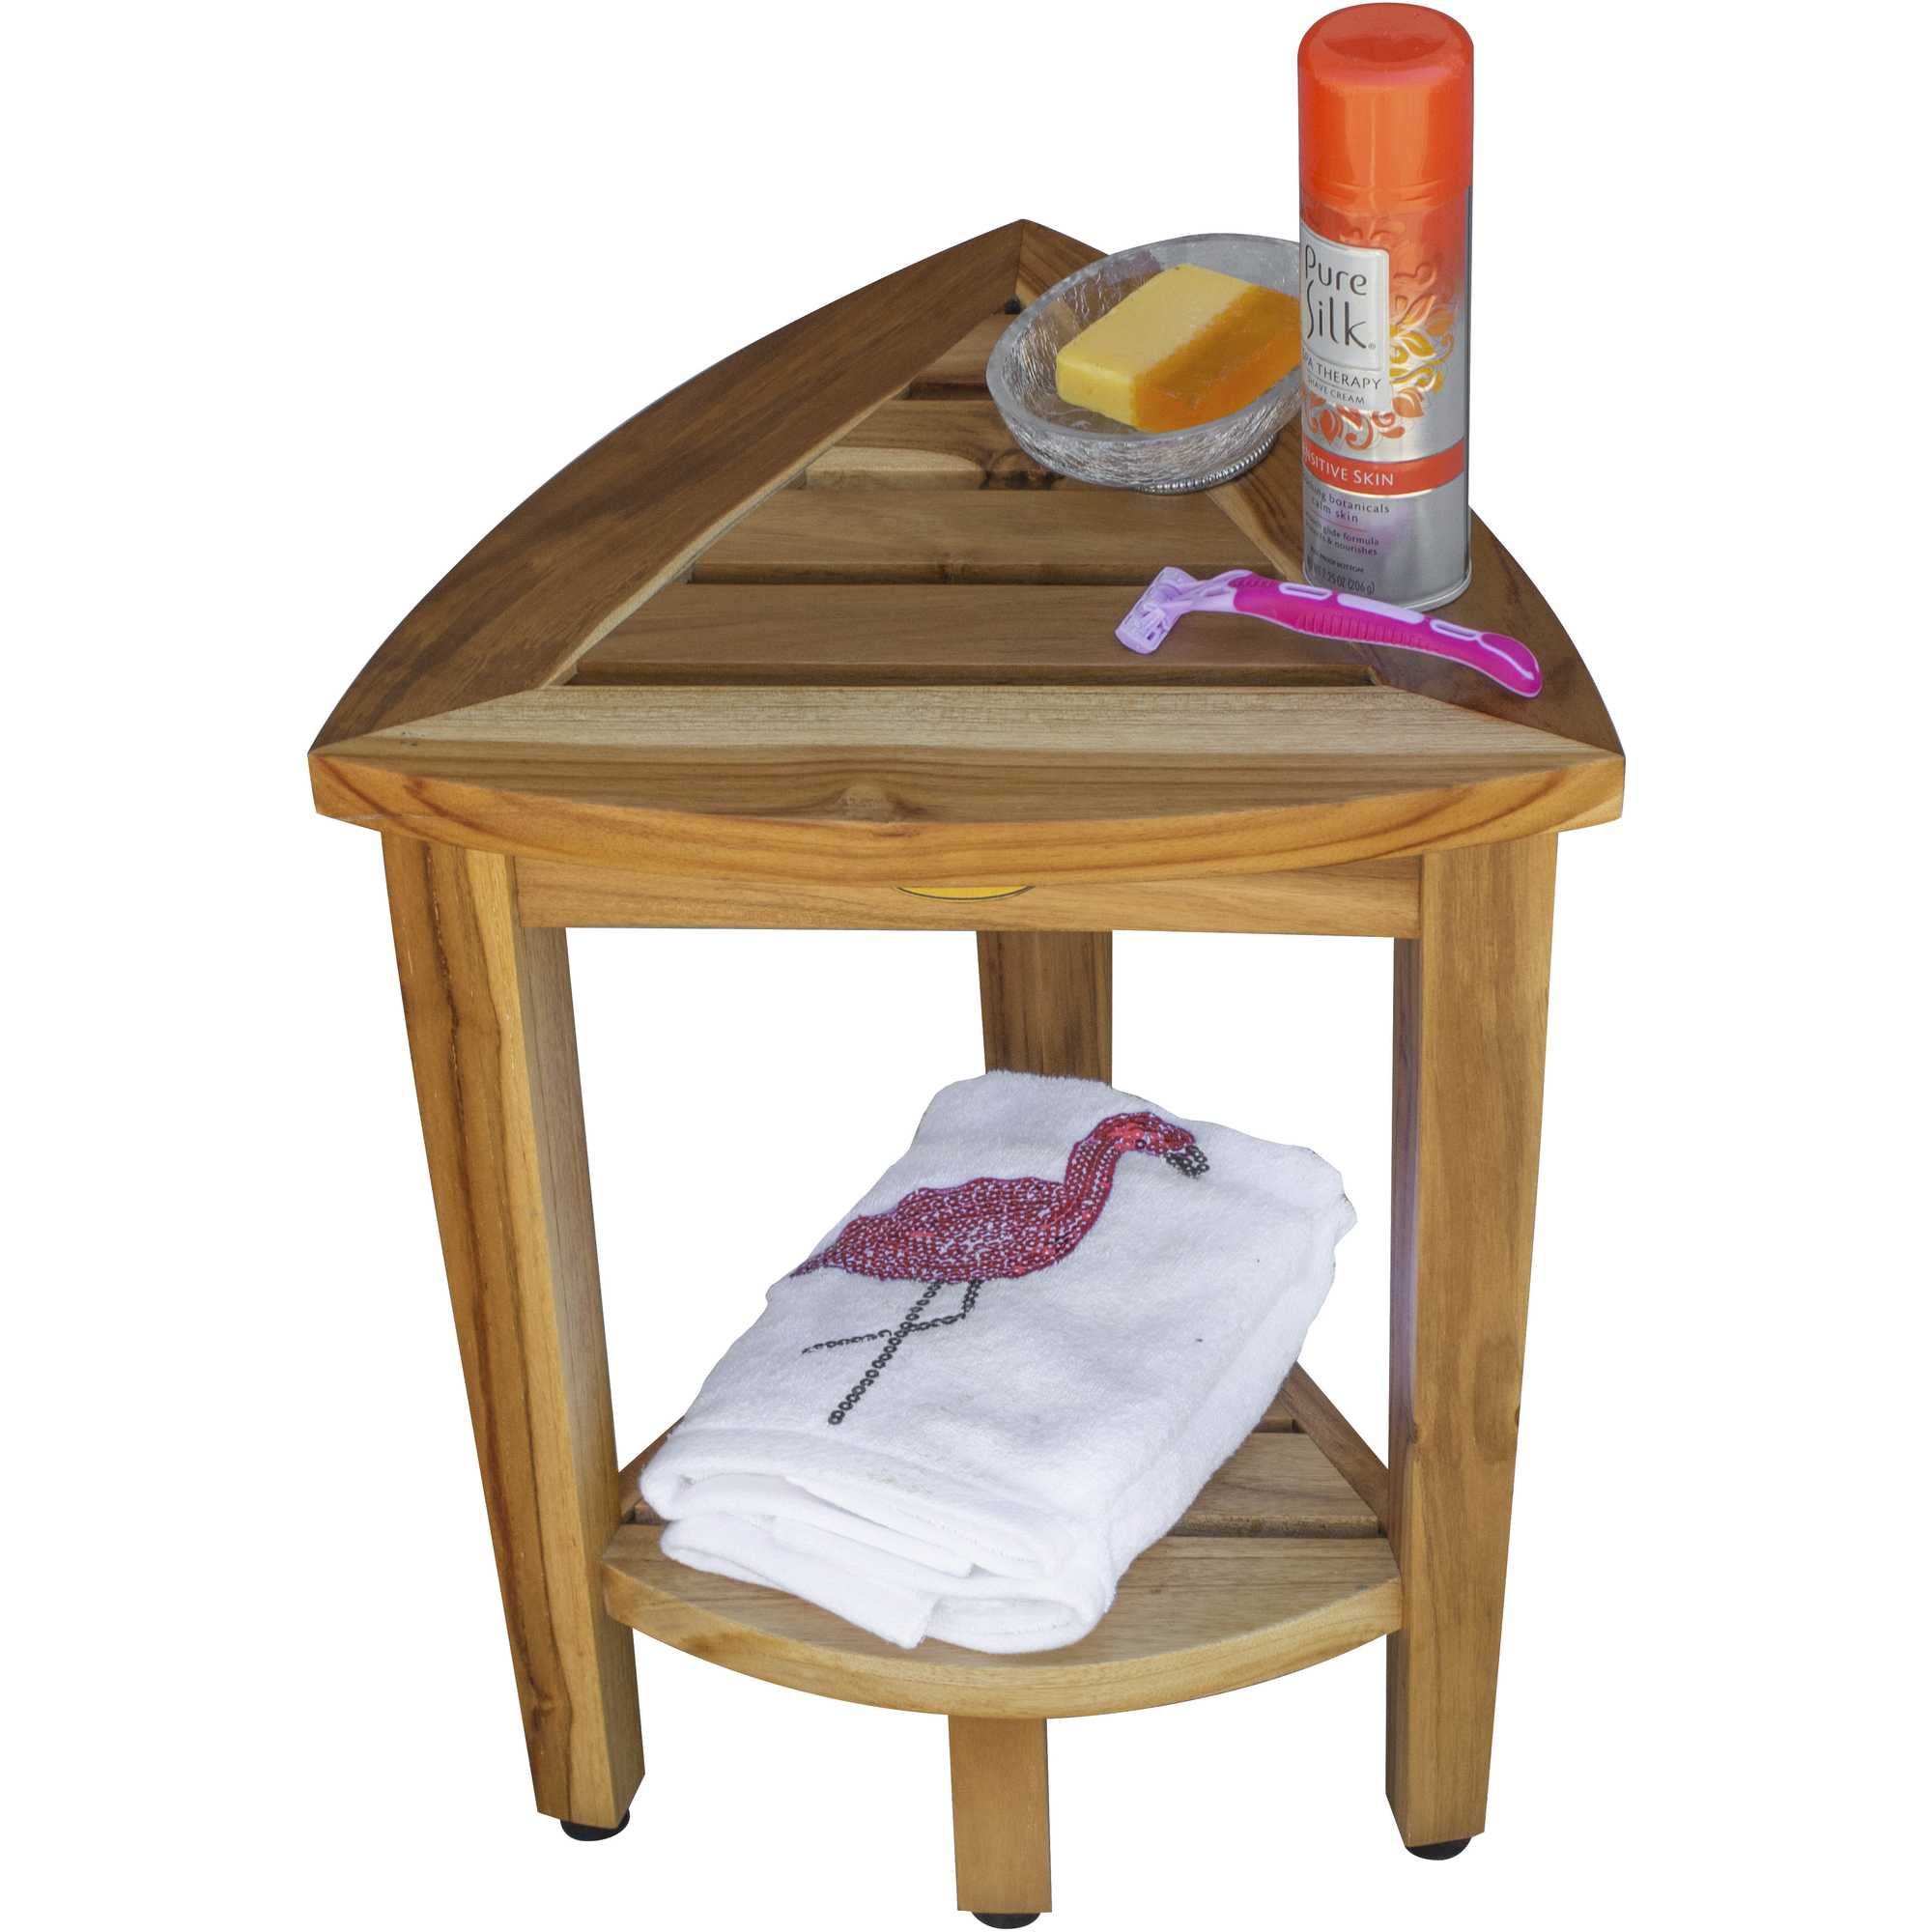 Compact Teak Corner Shower or Outdoor Bench with Shelf in Natural Finish